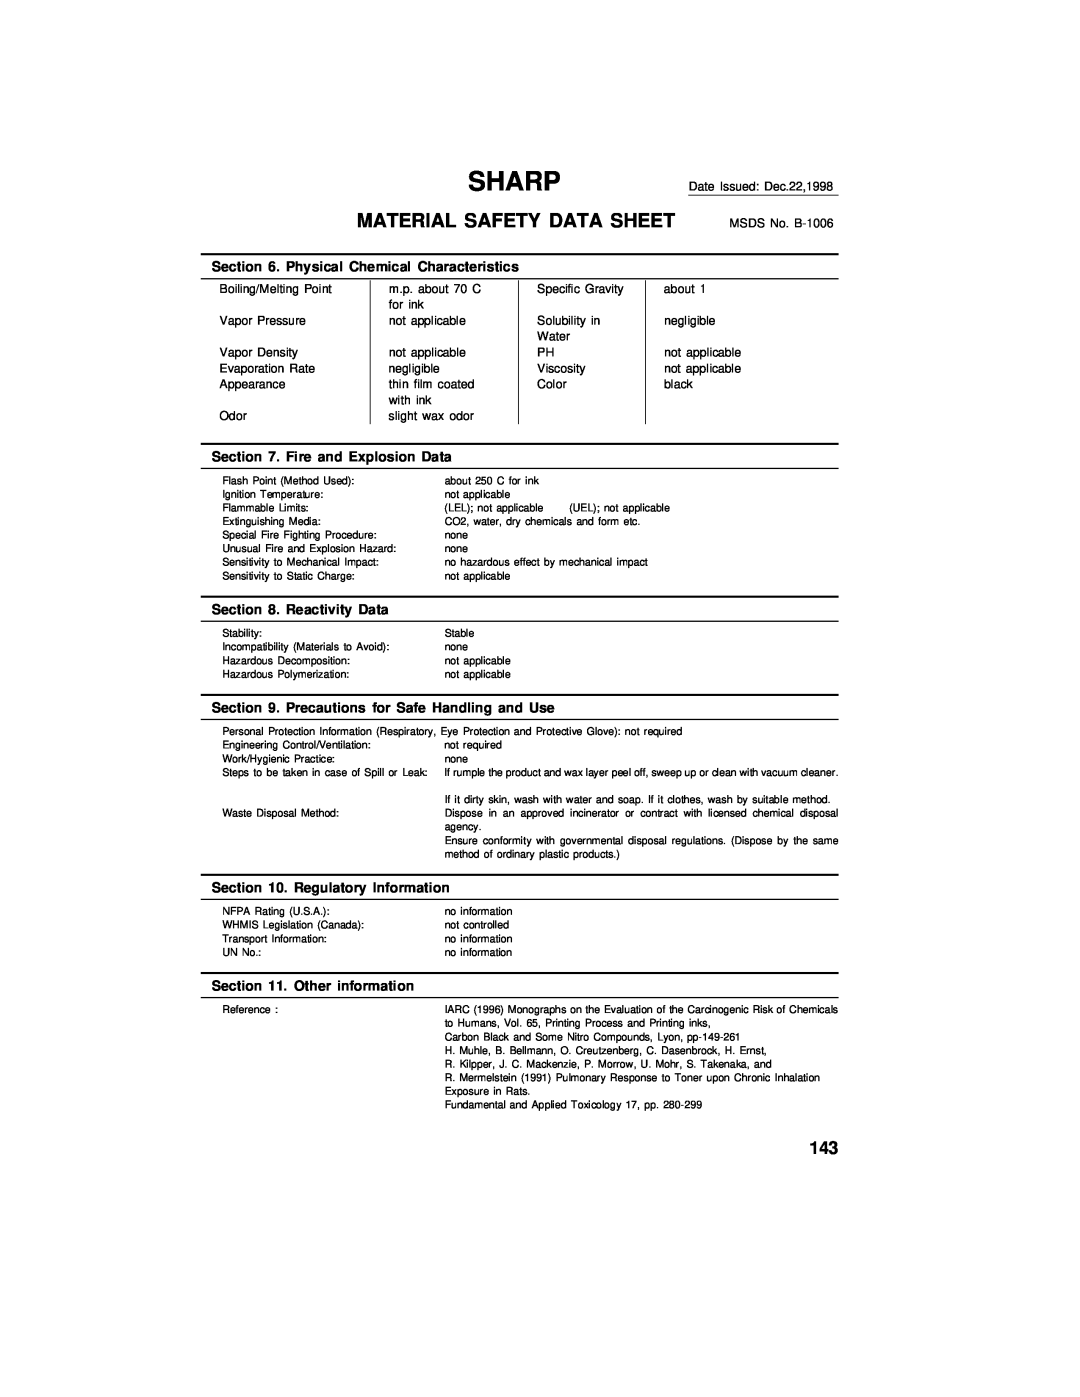 Sharp UX-460 operation manual Sharp, Material Safety Data Sheet, Physical Chemical Characteristics, Fire and Explosion Data 